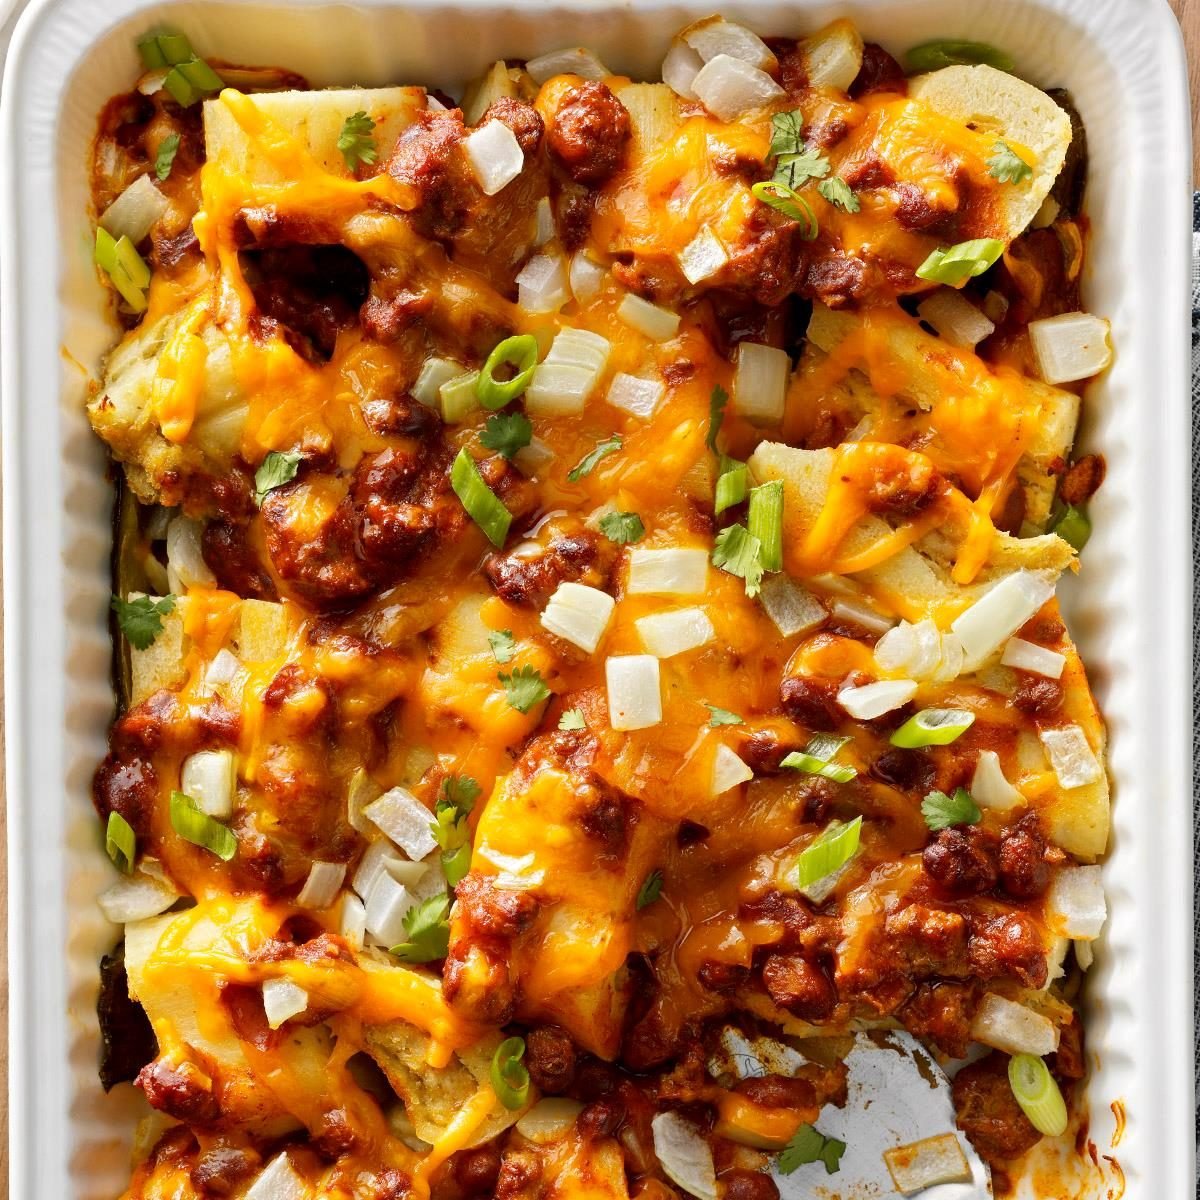 https://www.tasteofhome.com/wp-content/uploads/2022/05/Easy-Tamale-Pie-with-Peppers_EXPS_RC22_268295_DR_05_05_7b.jpg